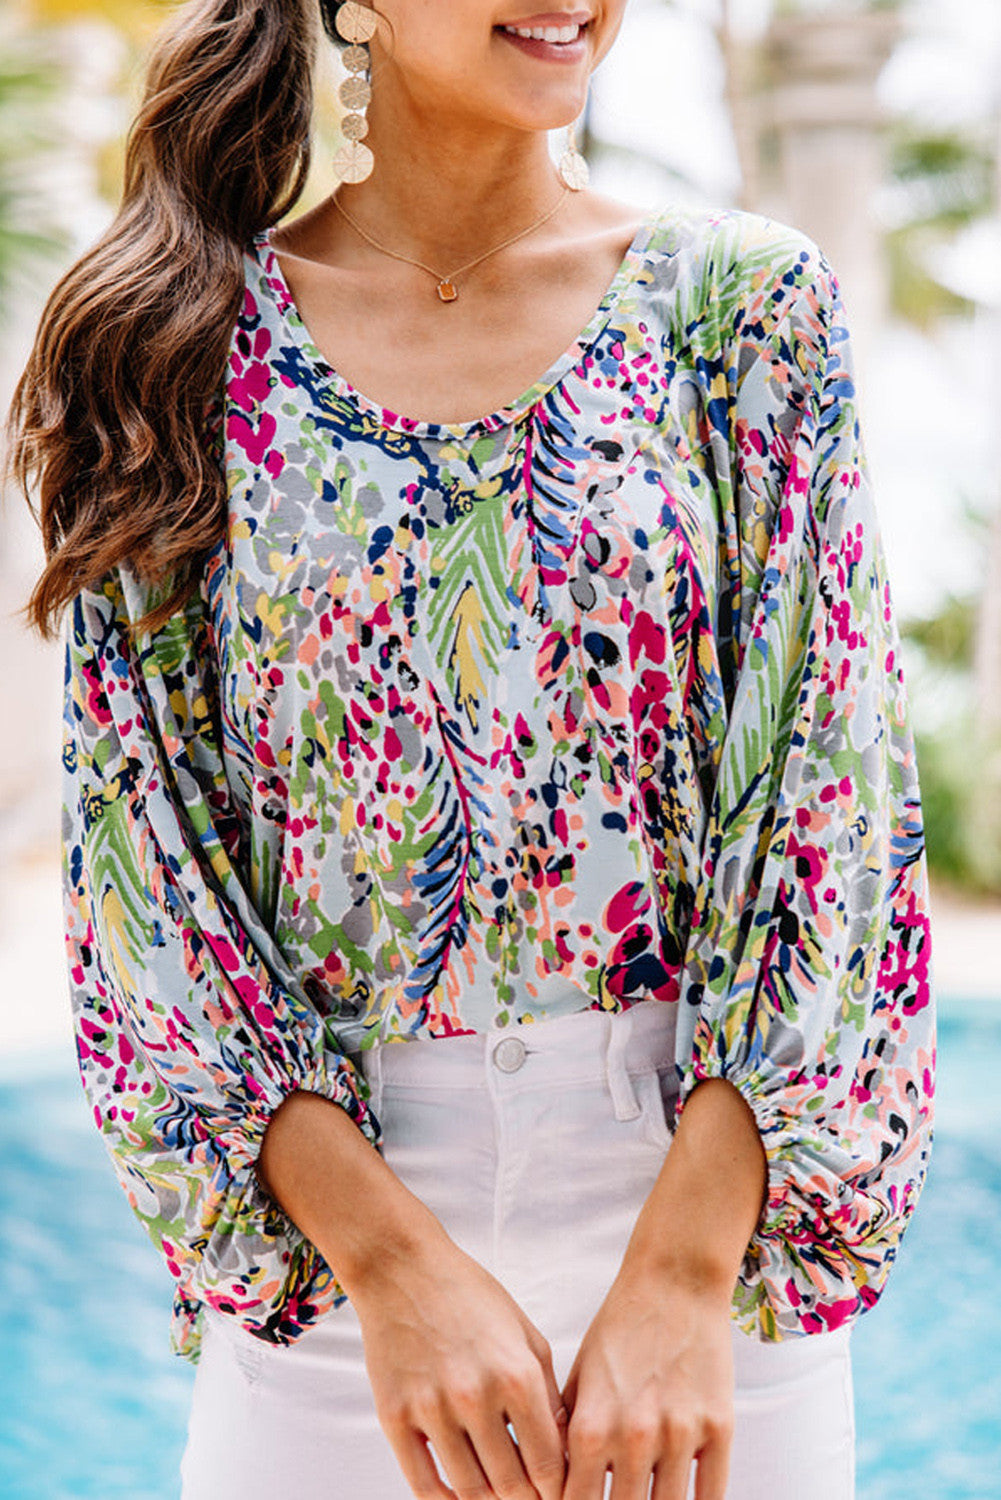 Green Floral Print Puffy Sleeve Loose Blouse Item NO.: 4734